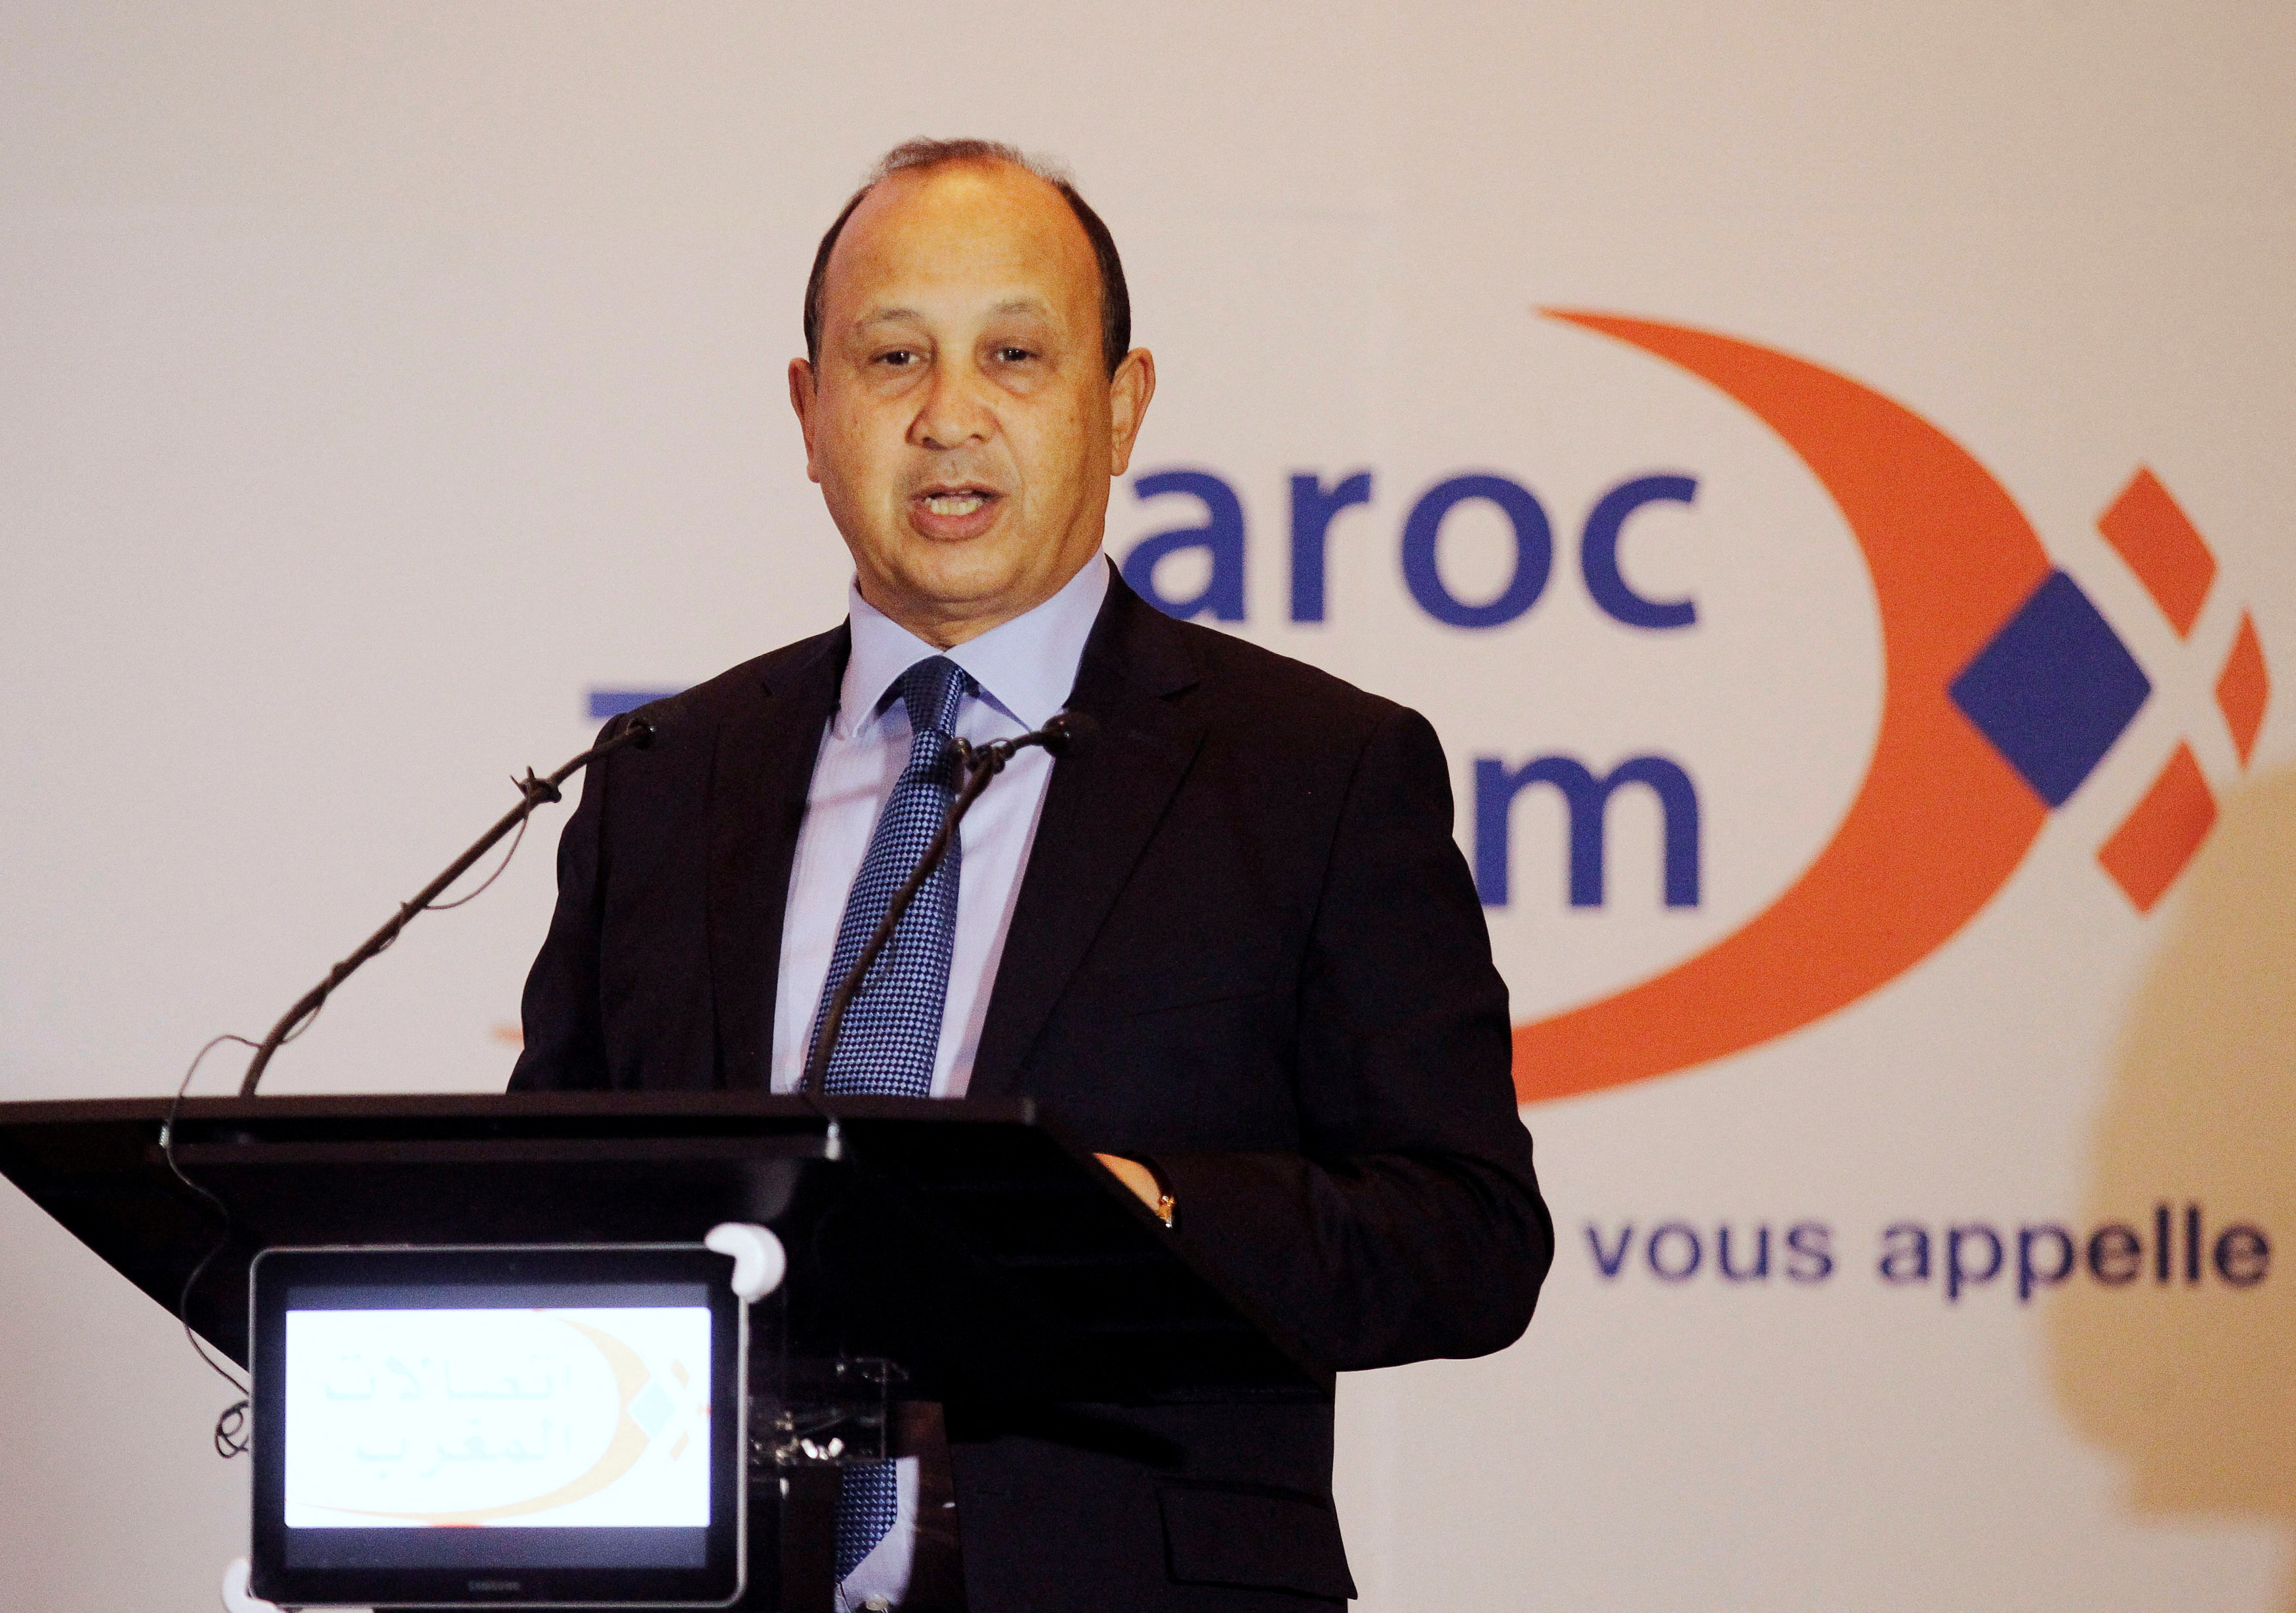 Maroc Telecom Chairman Ahizoune gestures during the company's full-year results news conference in Rabat